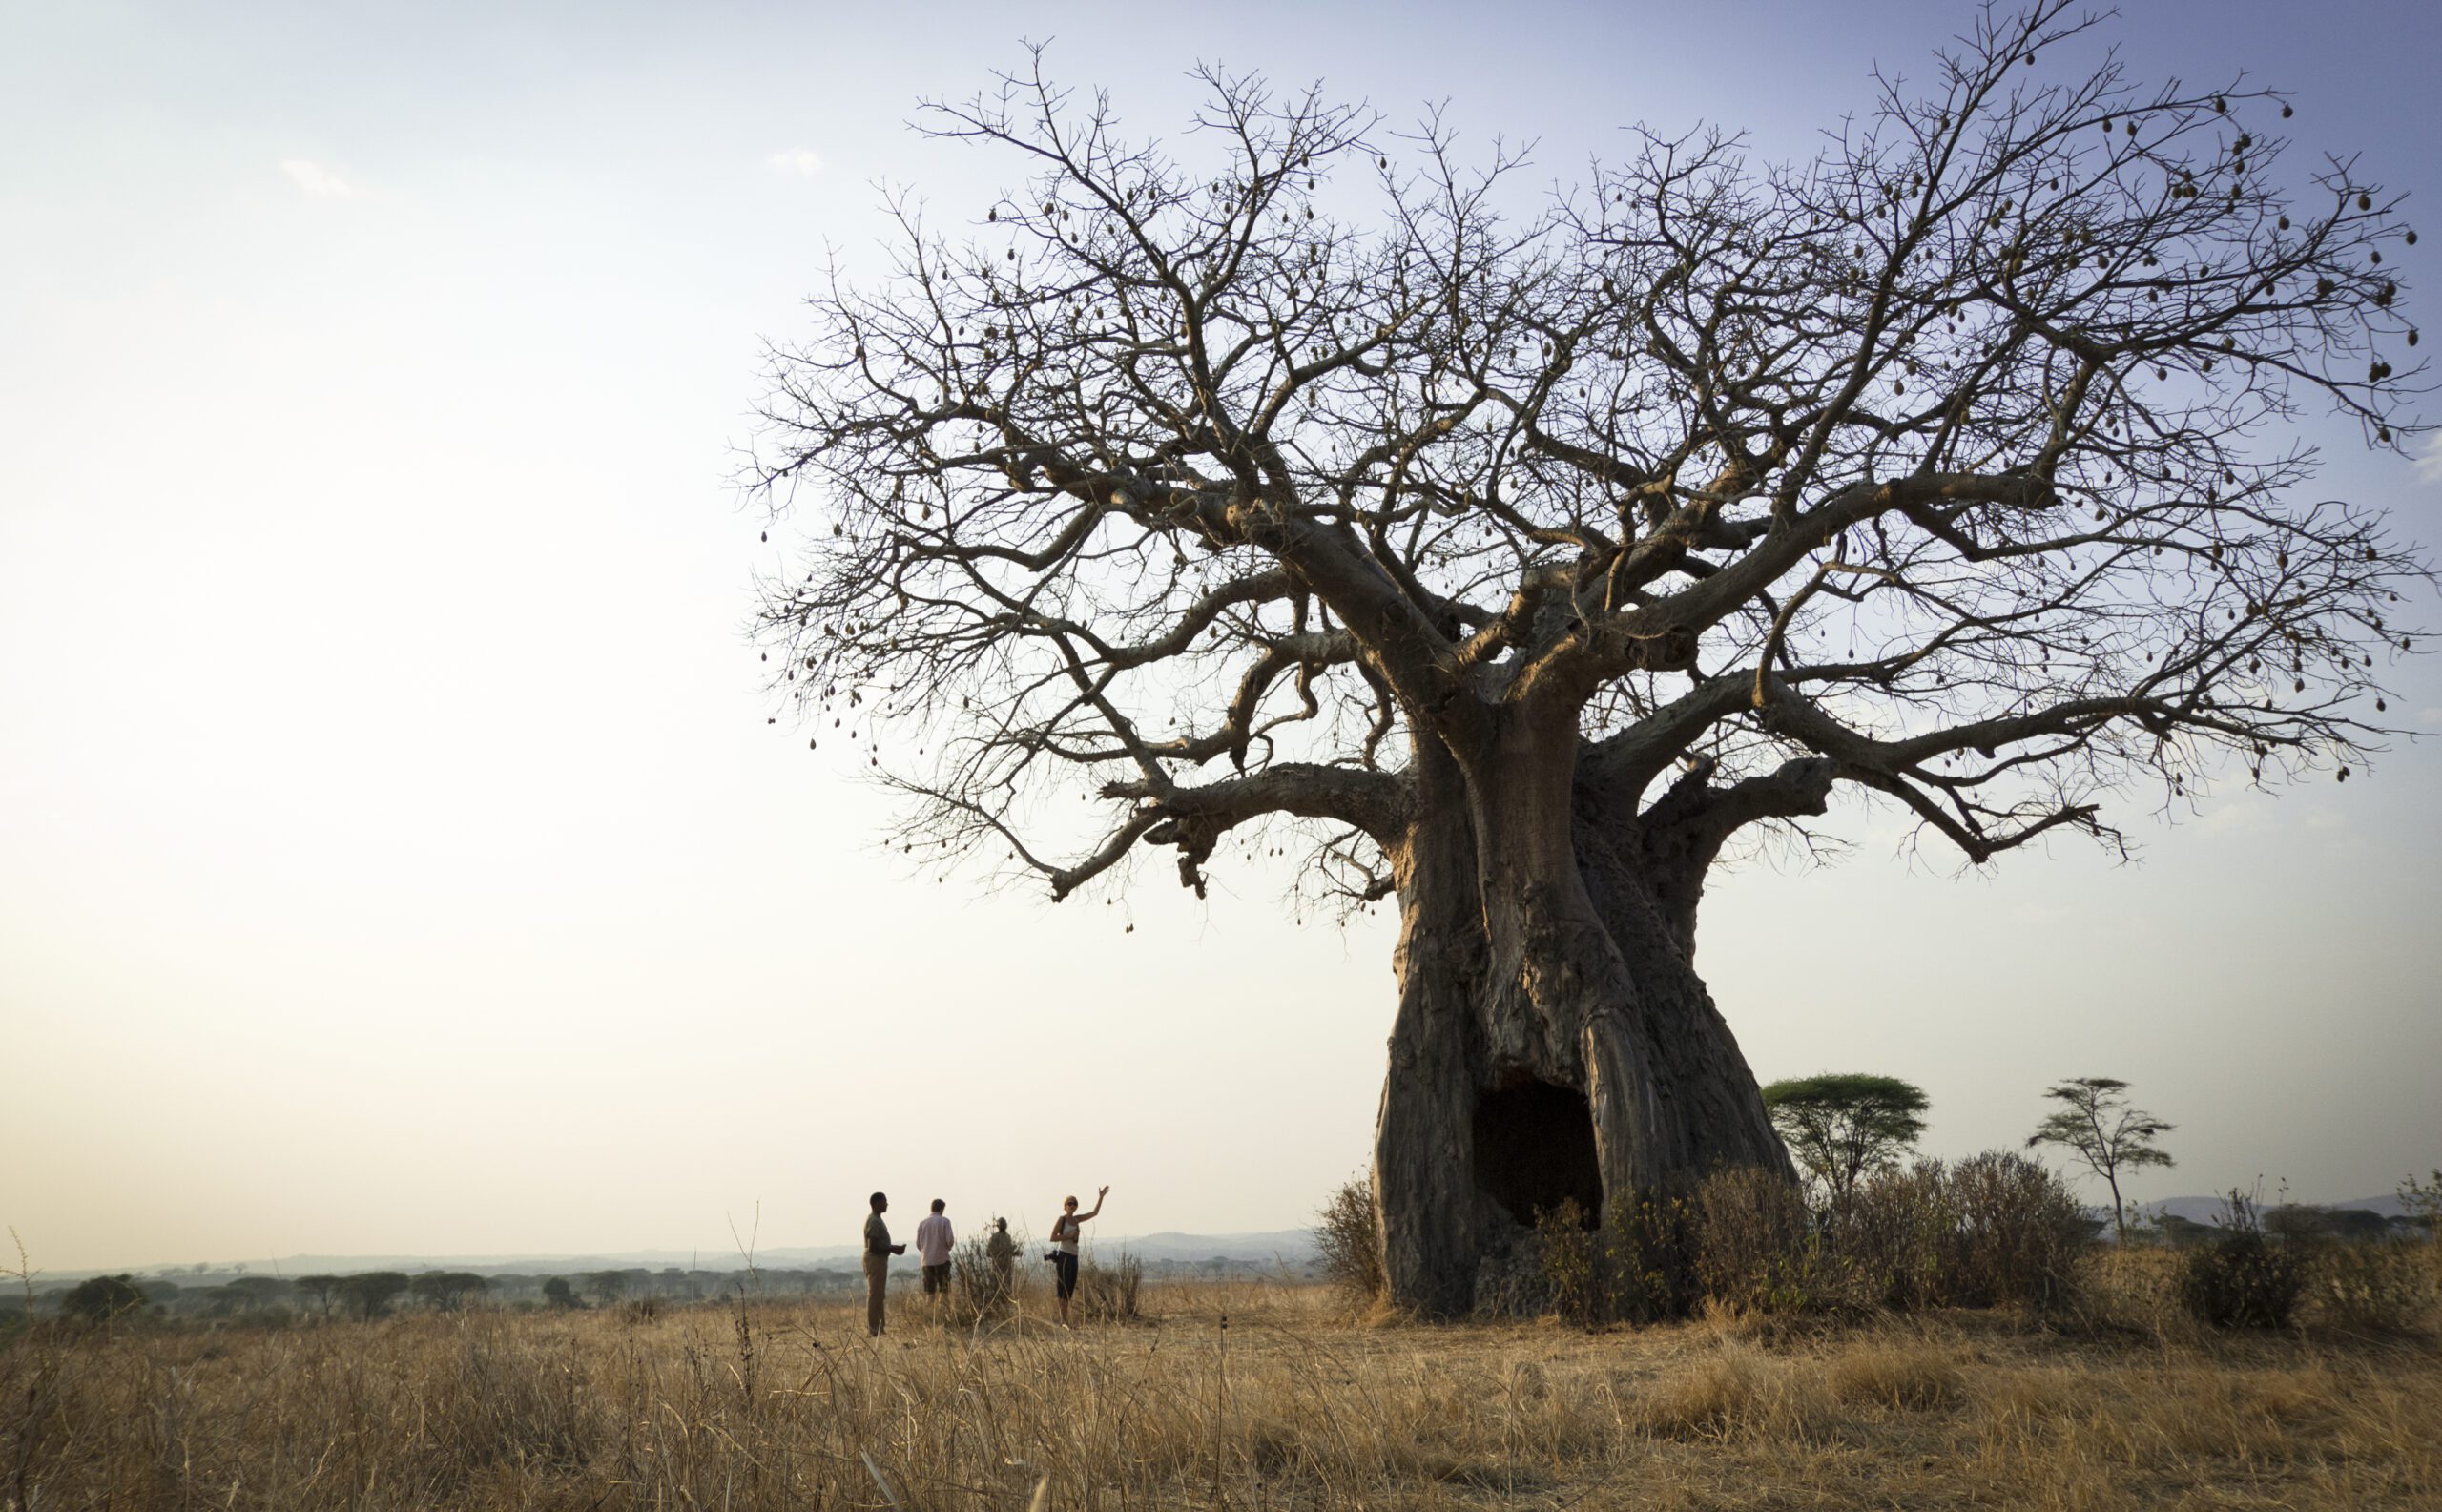 How To Do An Old School Safari, Baobab Tree, Road less travelled 